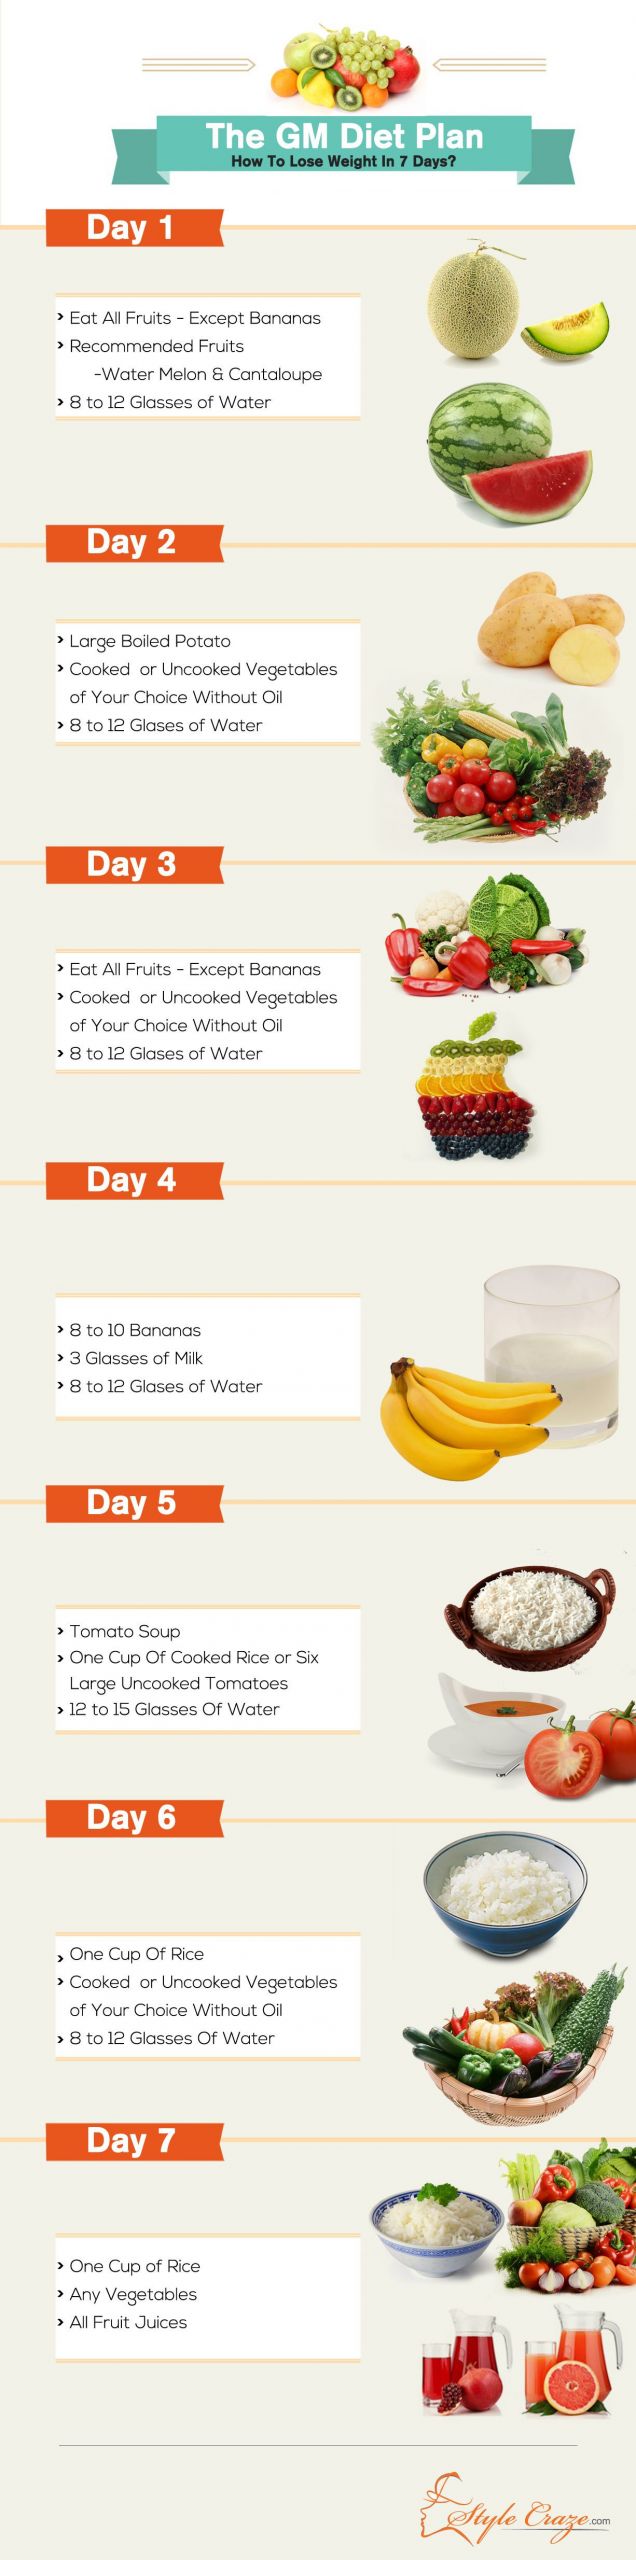 How To Lose Weight Quickly Diet Plans
 The GM Diet Plan How To Lose Weight In Just 7 Days